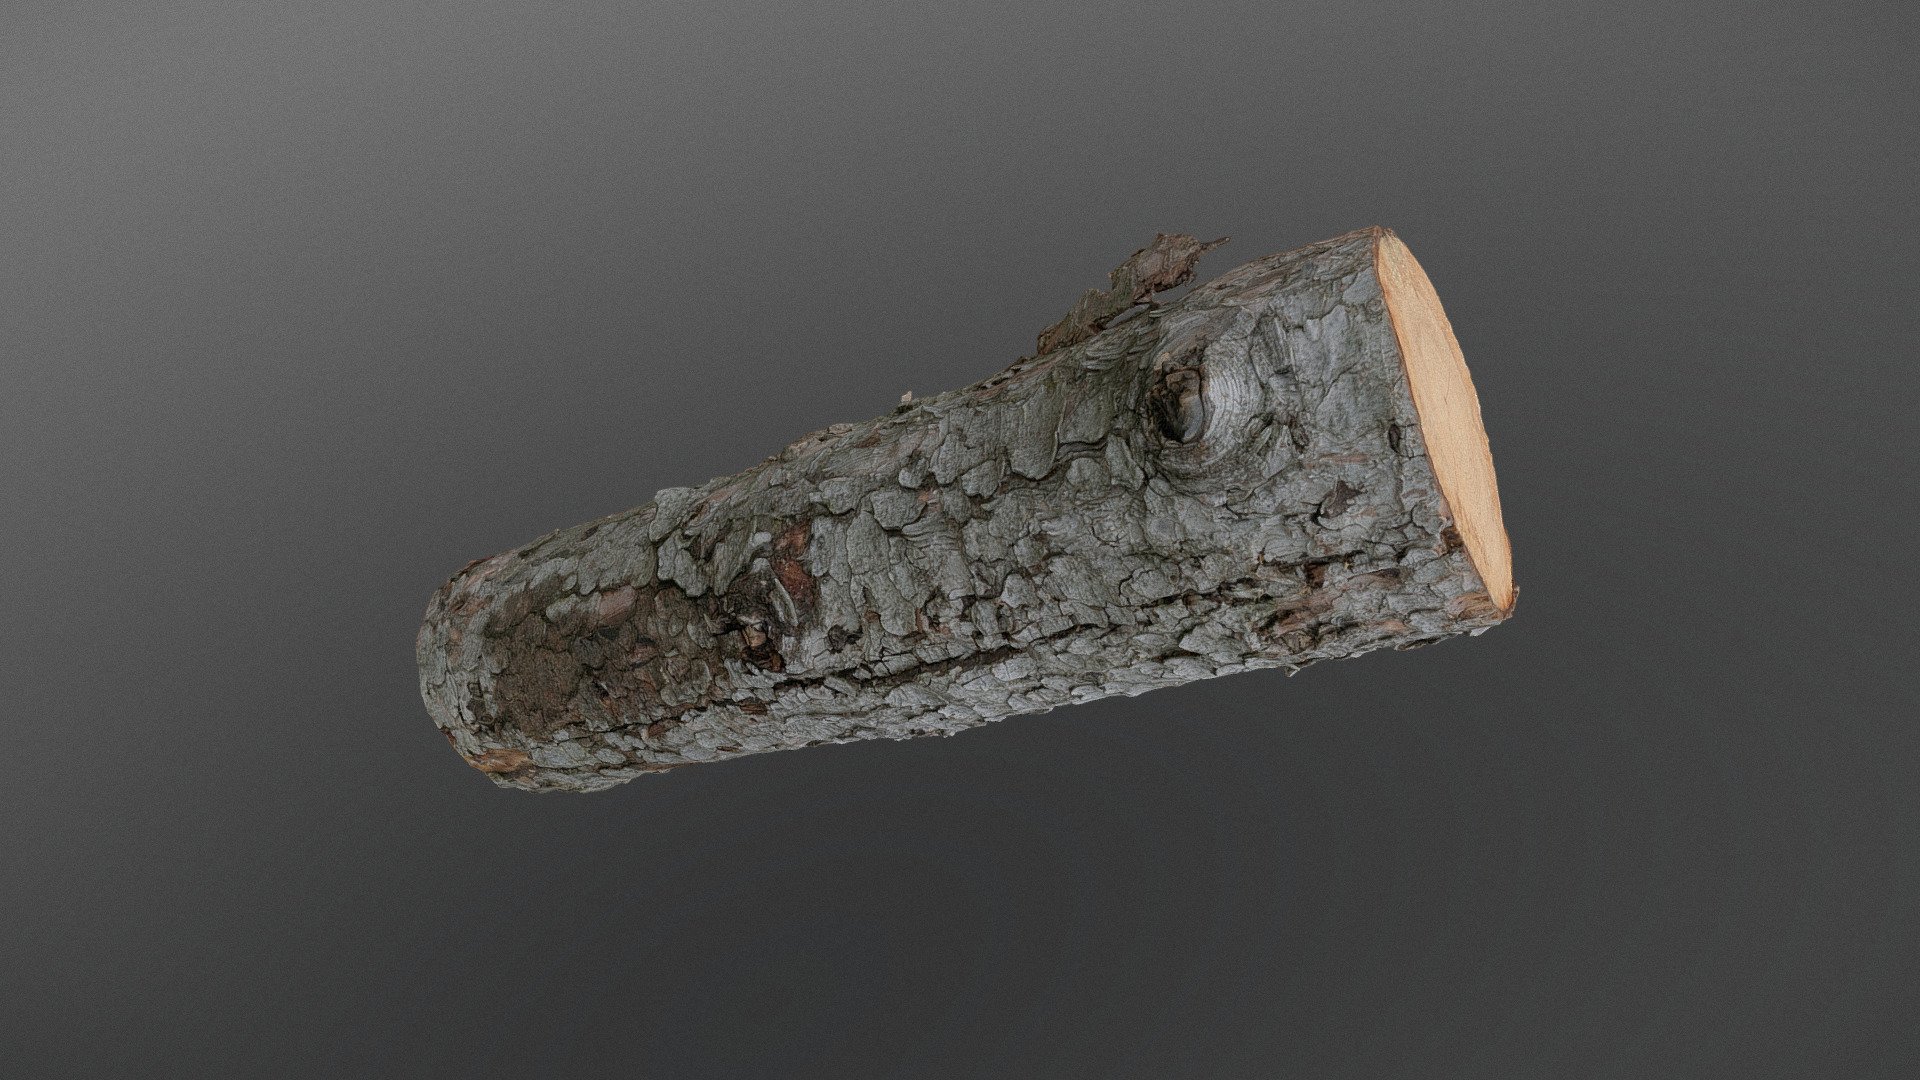 Thick spruce pine tree lumber wood log  chopping cut firewood timber lumber material isolated

photogrammetry scan (150x36MP), 3x8K textures - Spruce log - Buy Royalty Free 3D model by matousekfoto 3d model